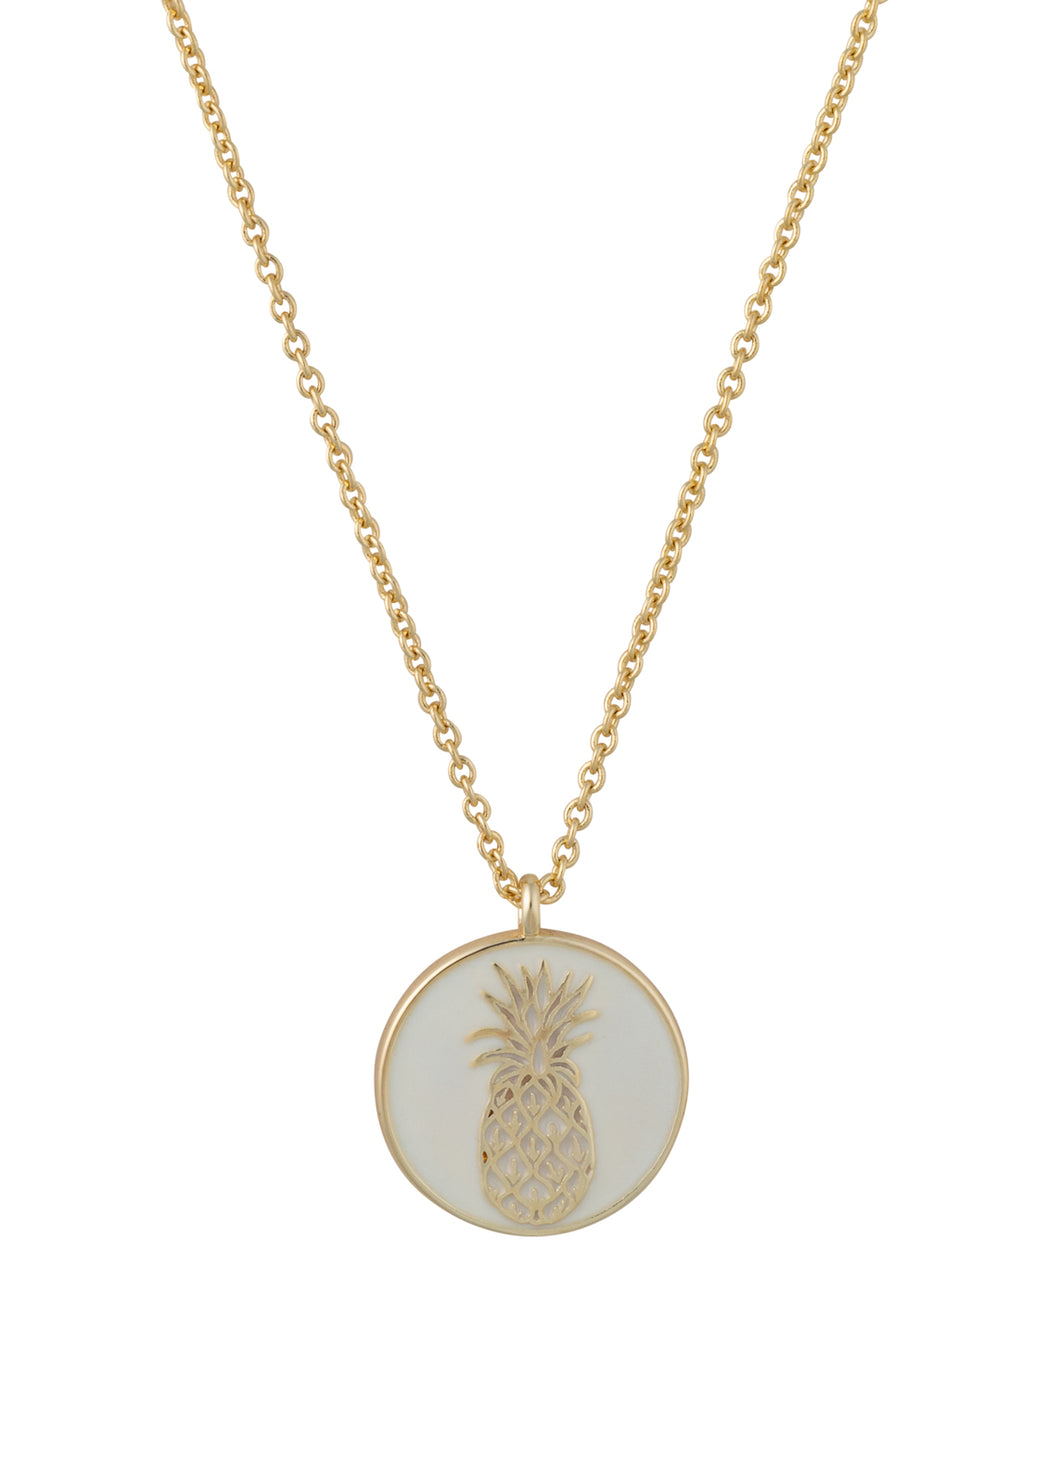 lanai pineapple coin charm necklace